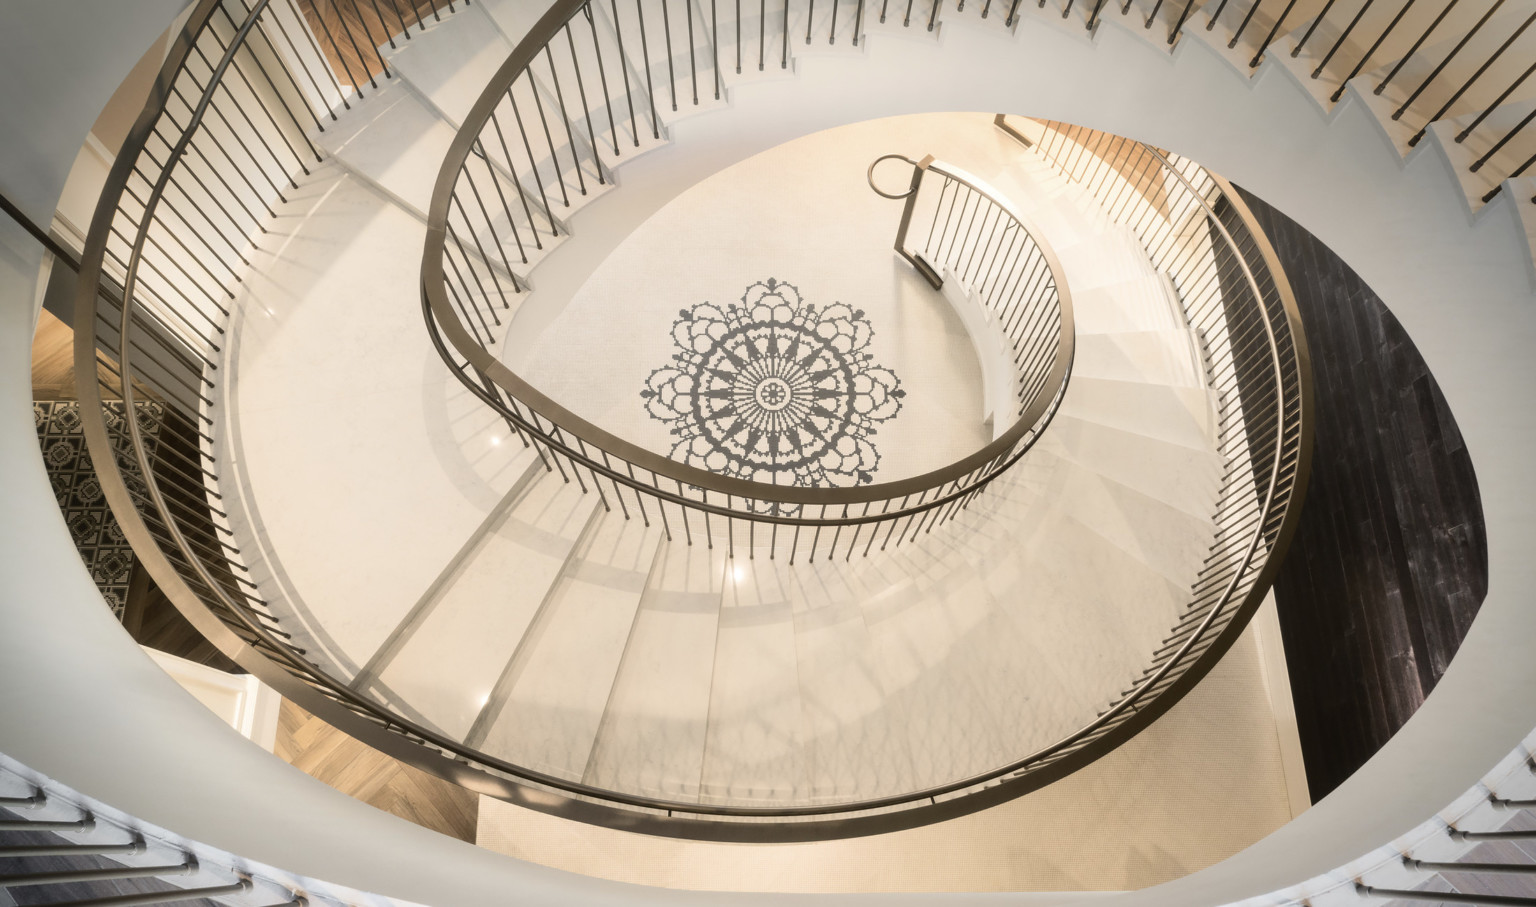 View from above of white spiral staircase with metallic railing. At the center of the floor in the spiral is a black mandala